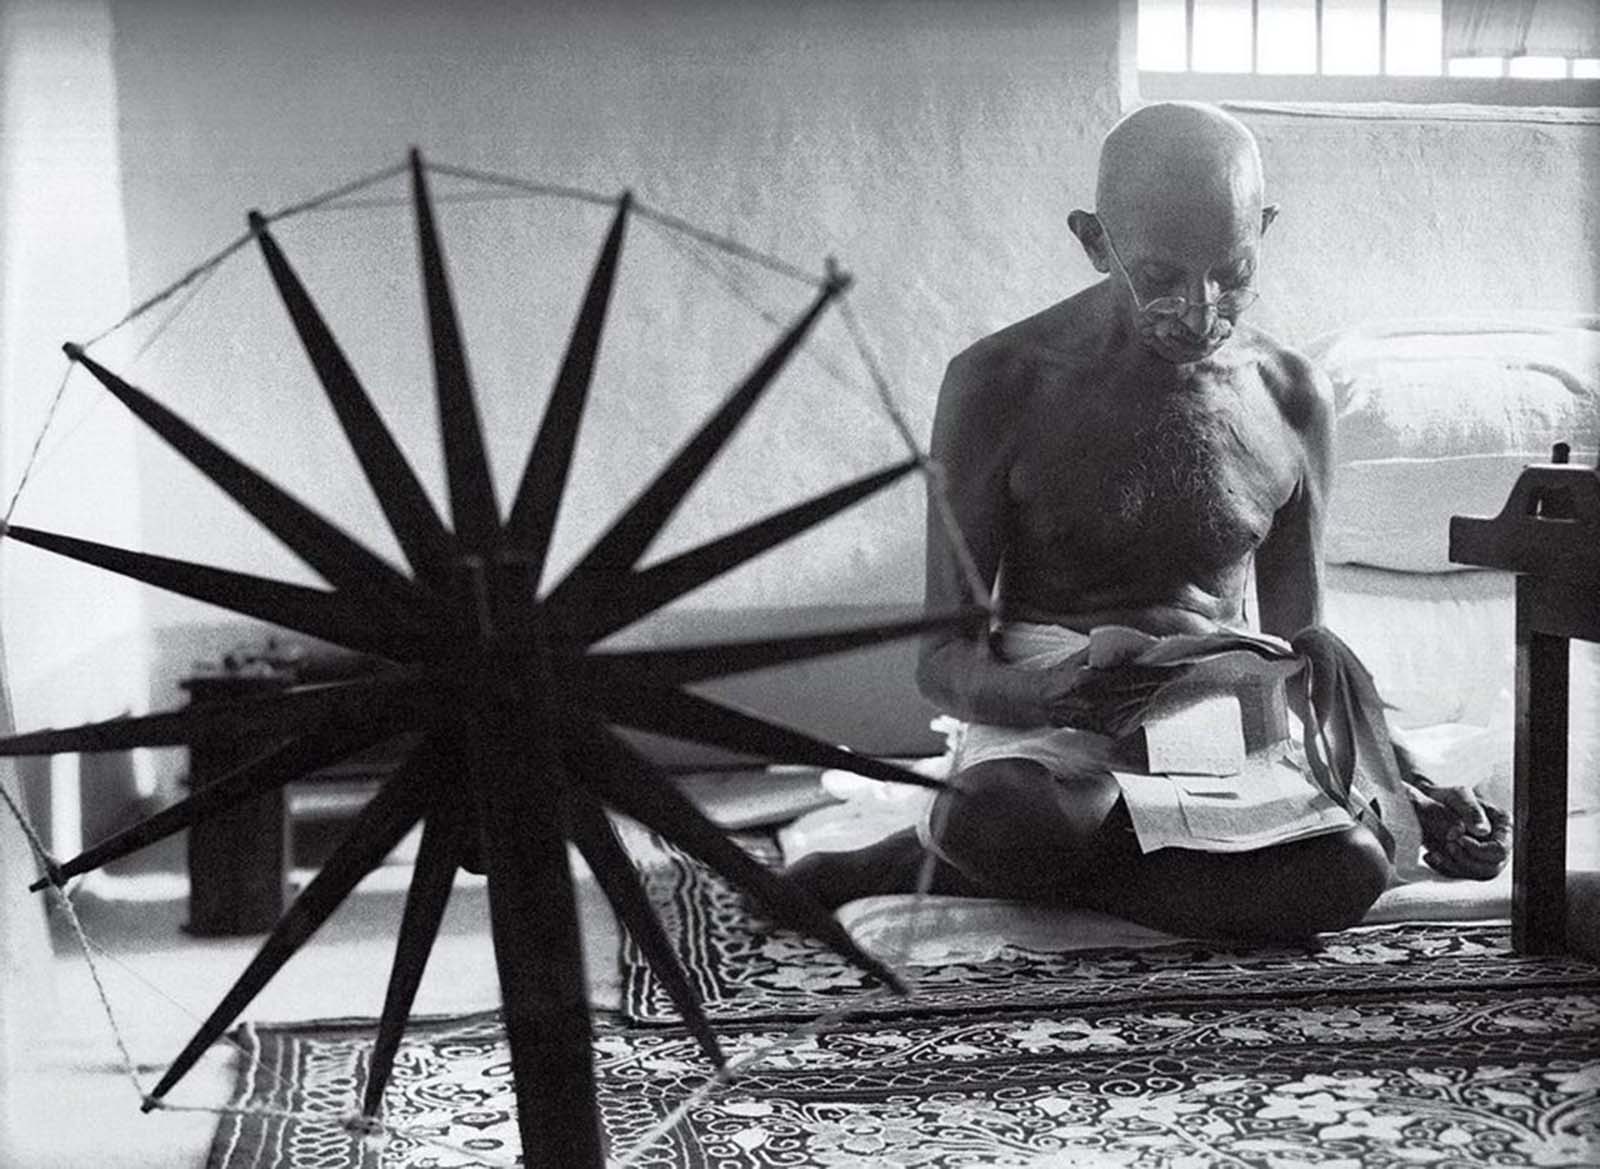 Gandhi And The Spinning Wheel, 1946